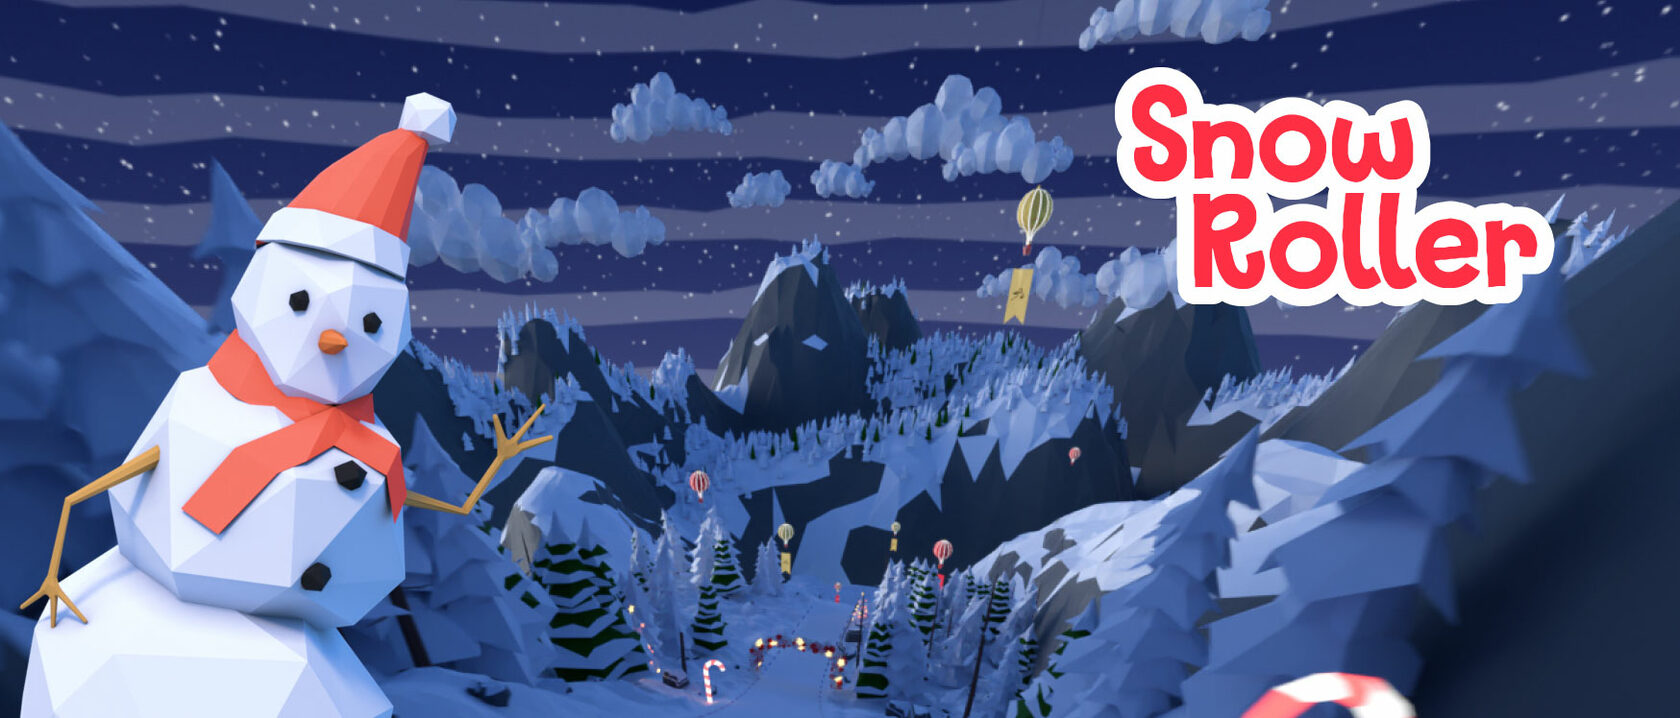 Help snowman stay alive in the new Snow Roller game for SkyTechSport